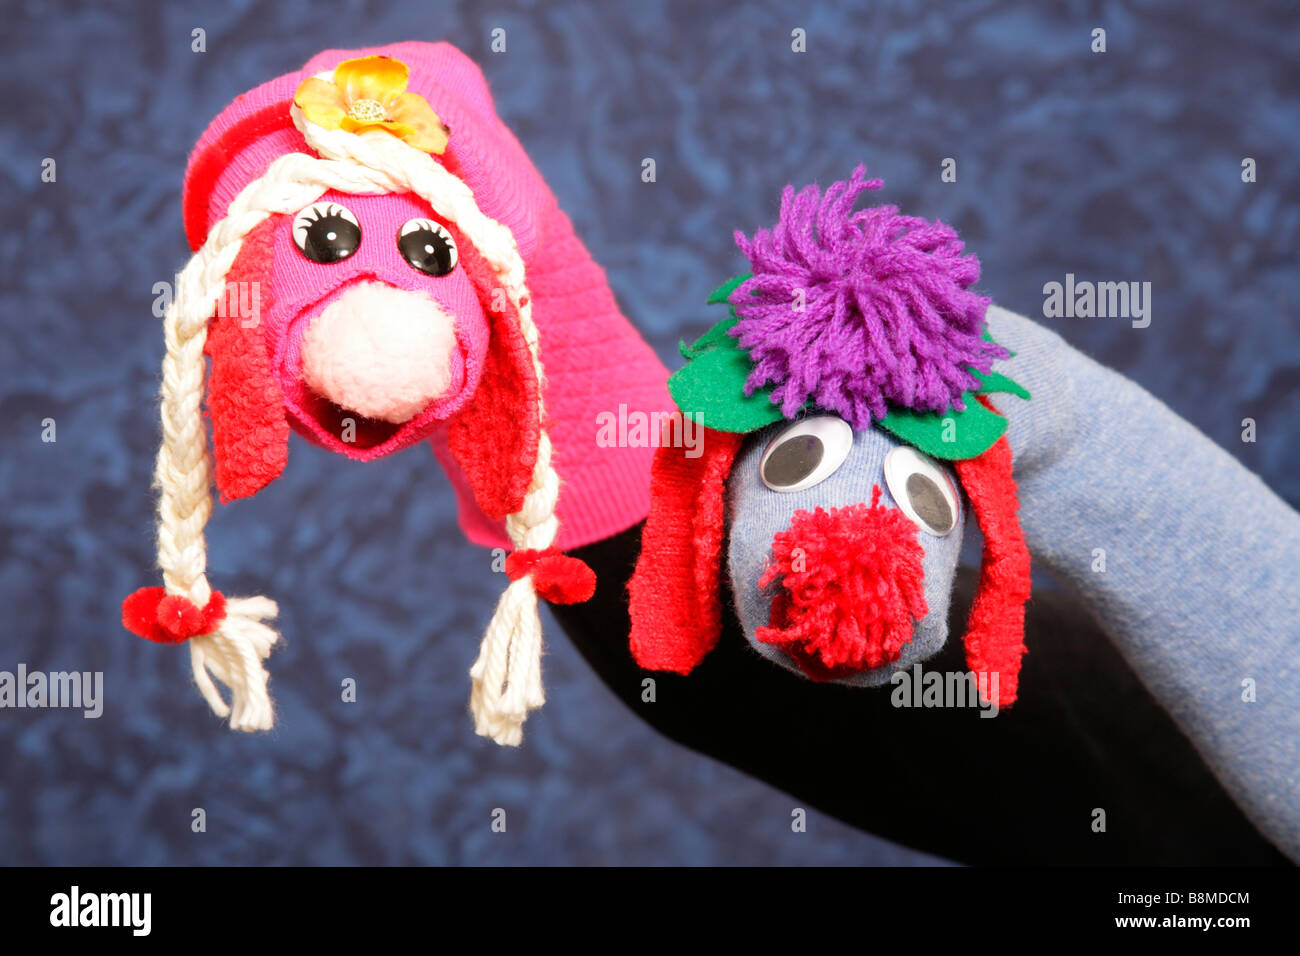 Hand manipulated pair of character puppets created from socks. Stock Photo